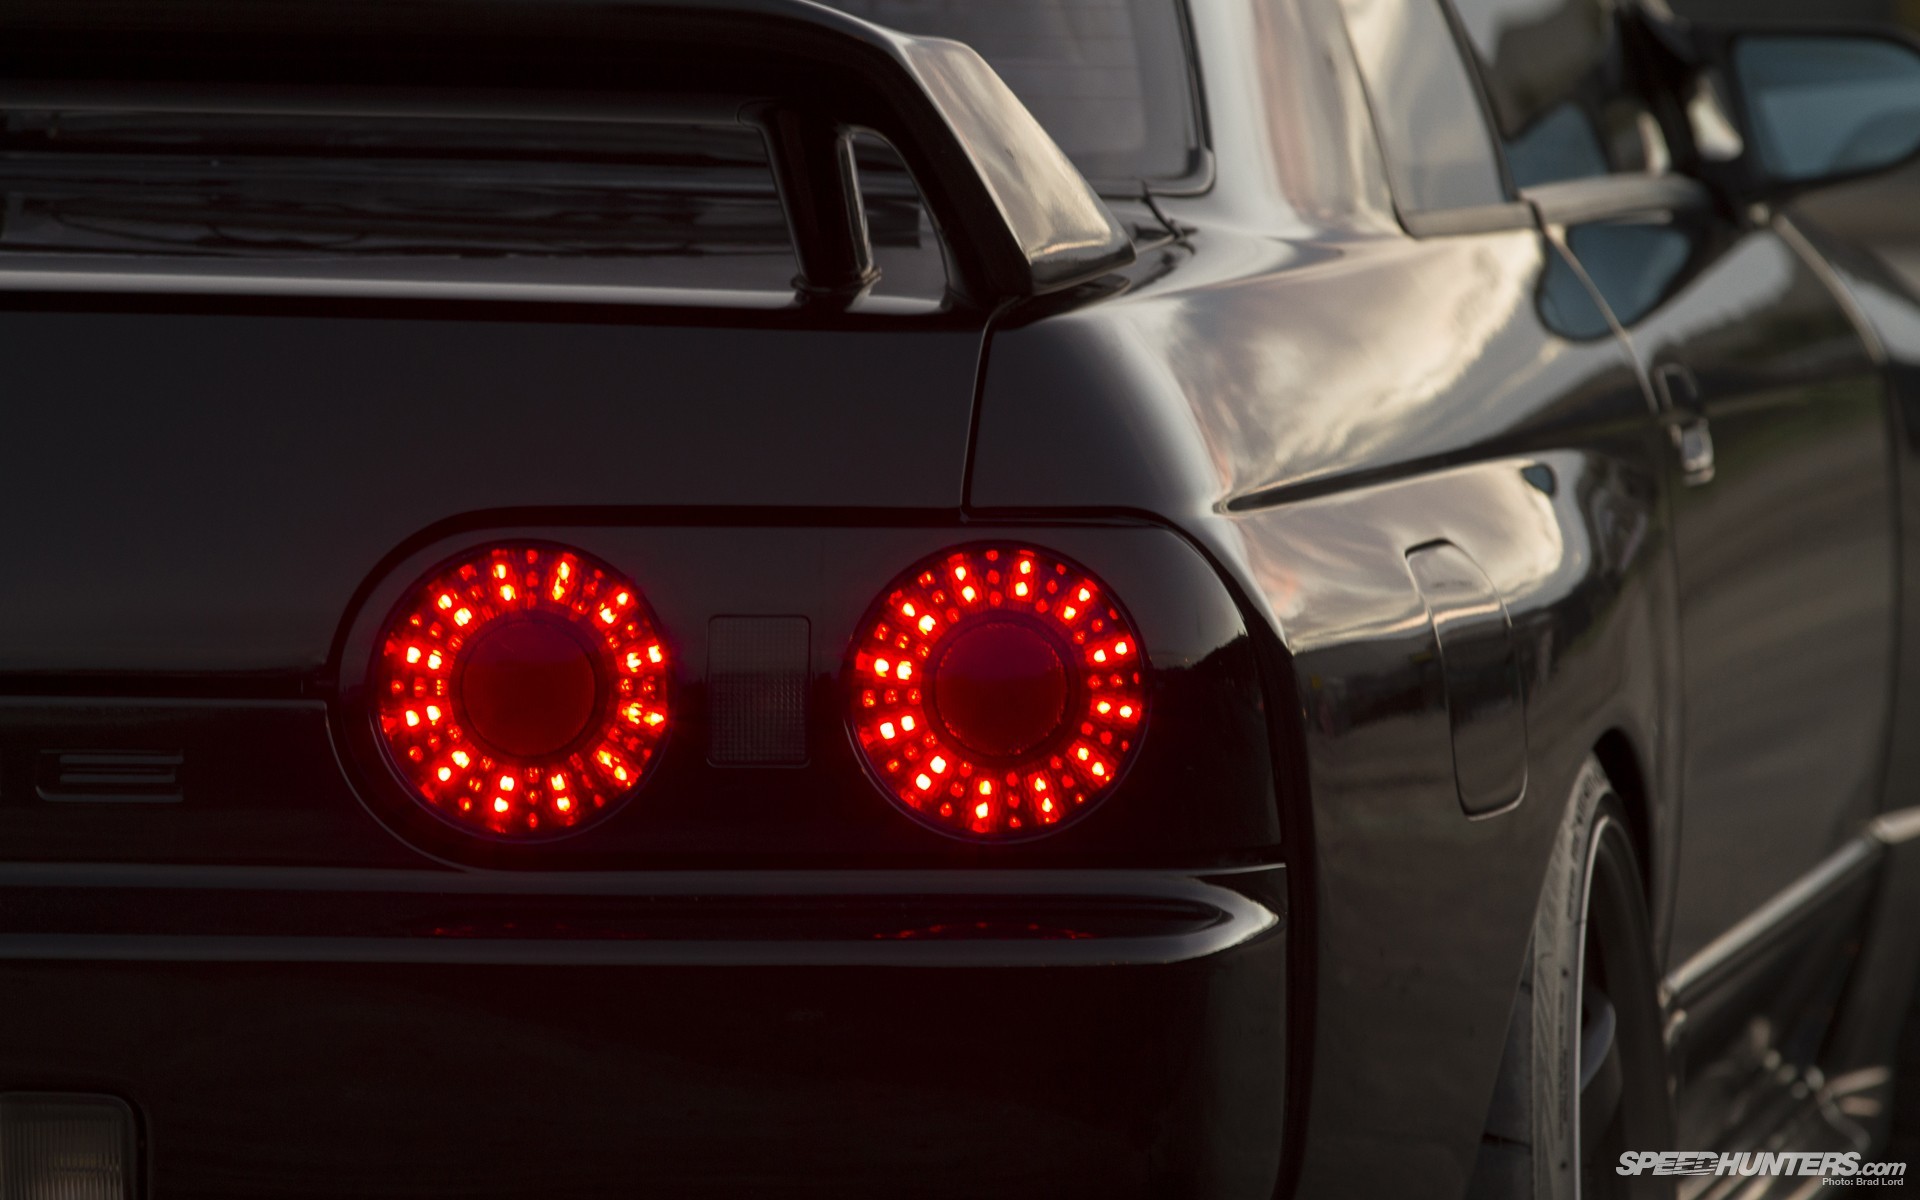 Car Speedhunters Nissan Skyline R32 Wallpapers Hd Desktop And Mobile Backgrounds